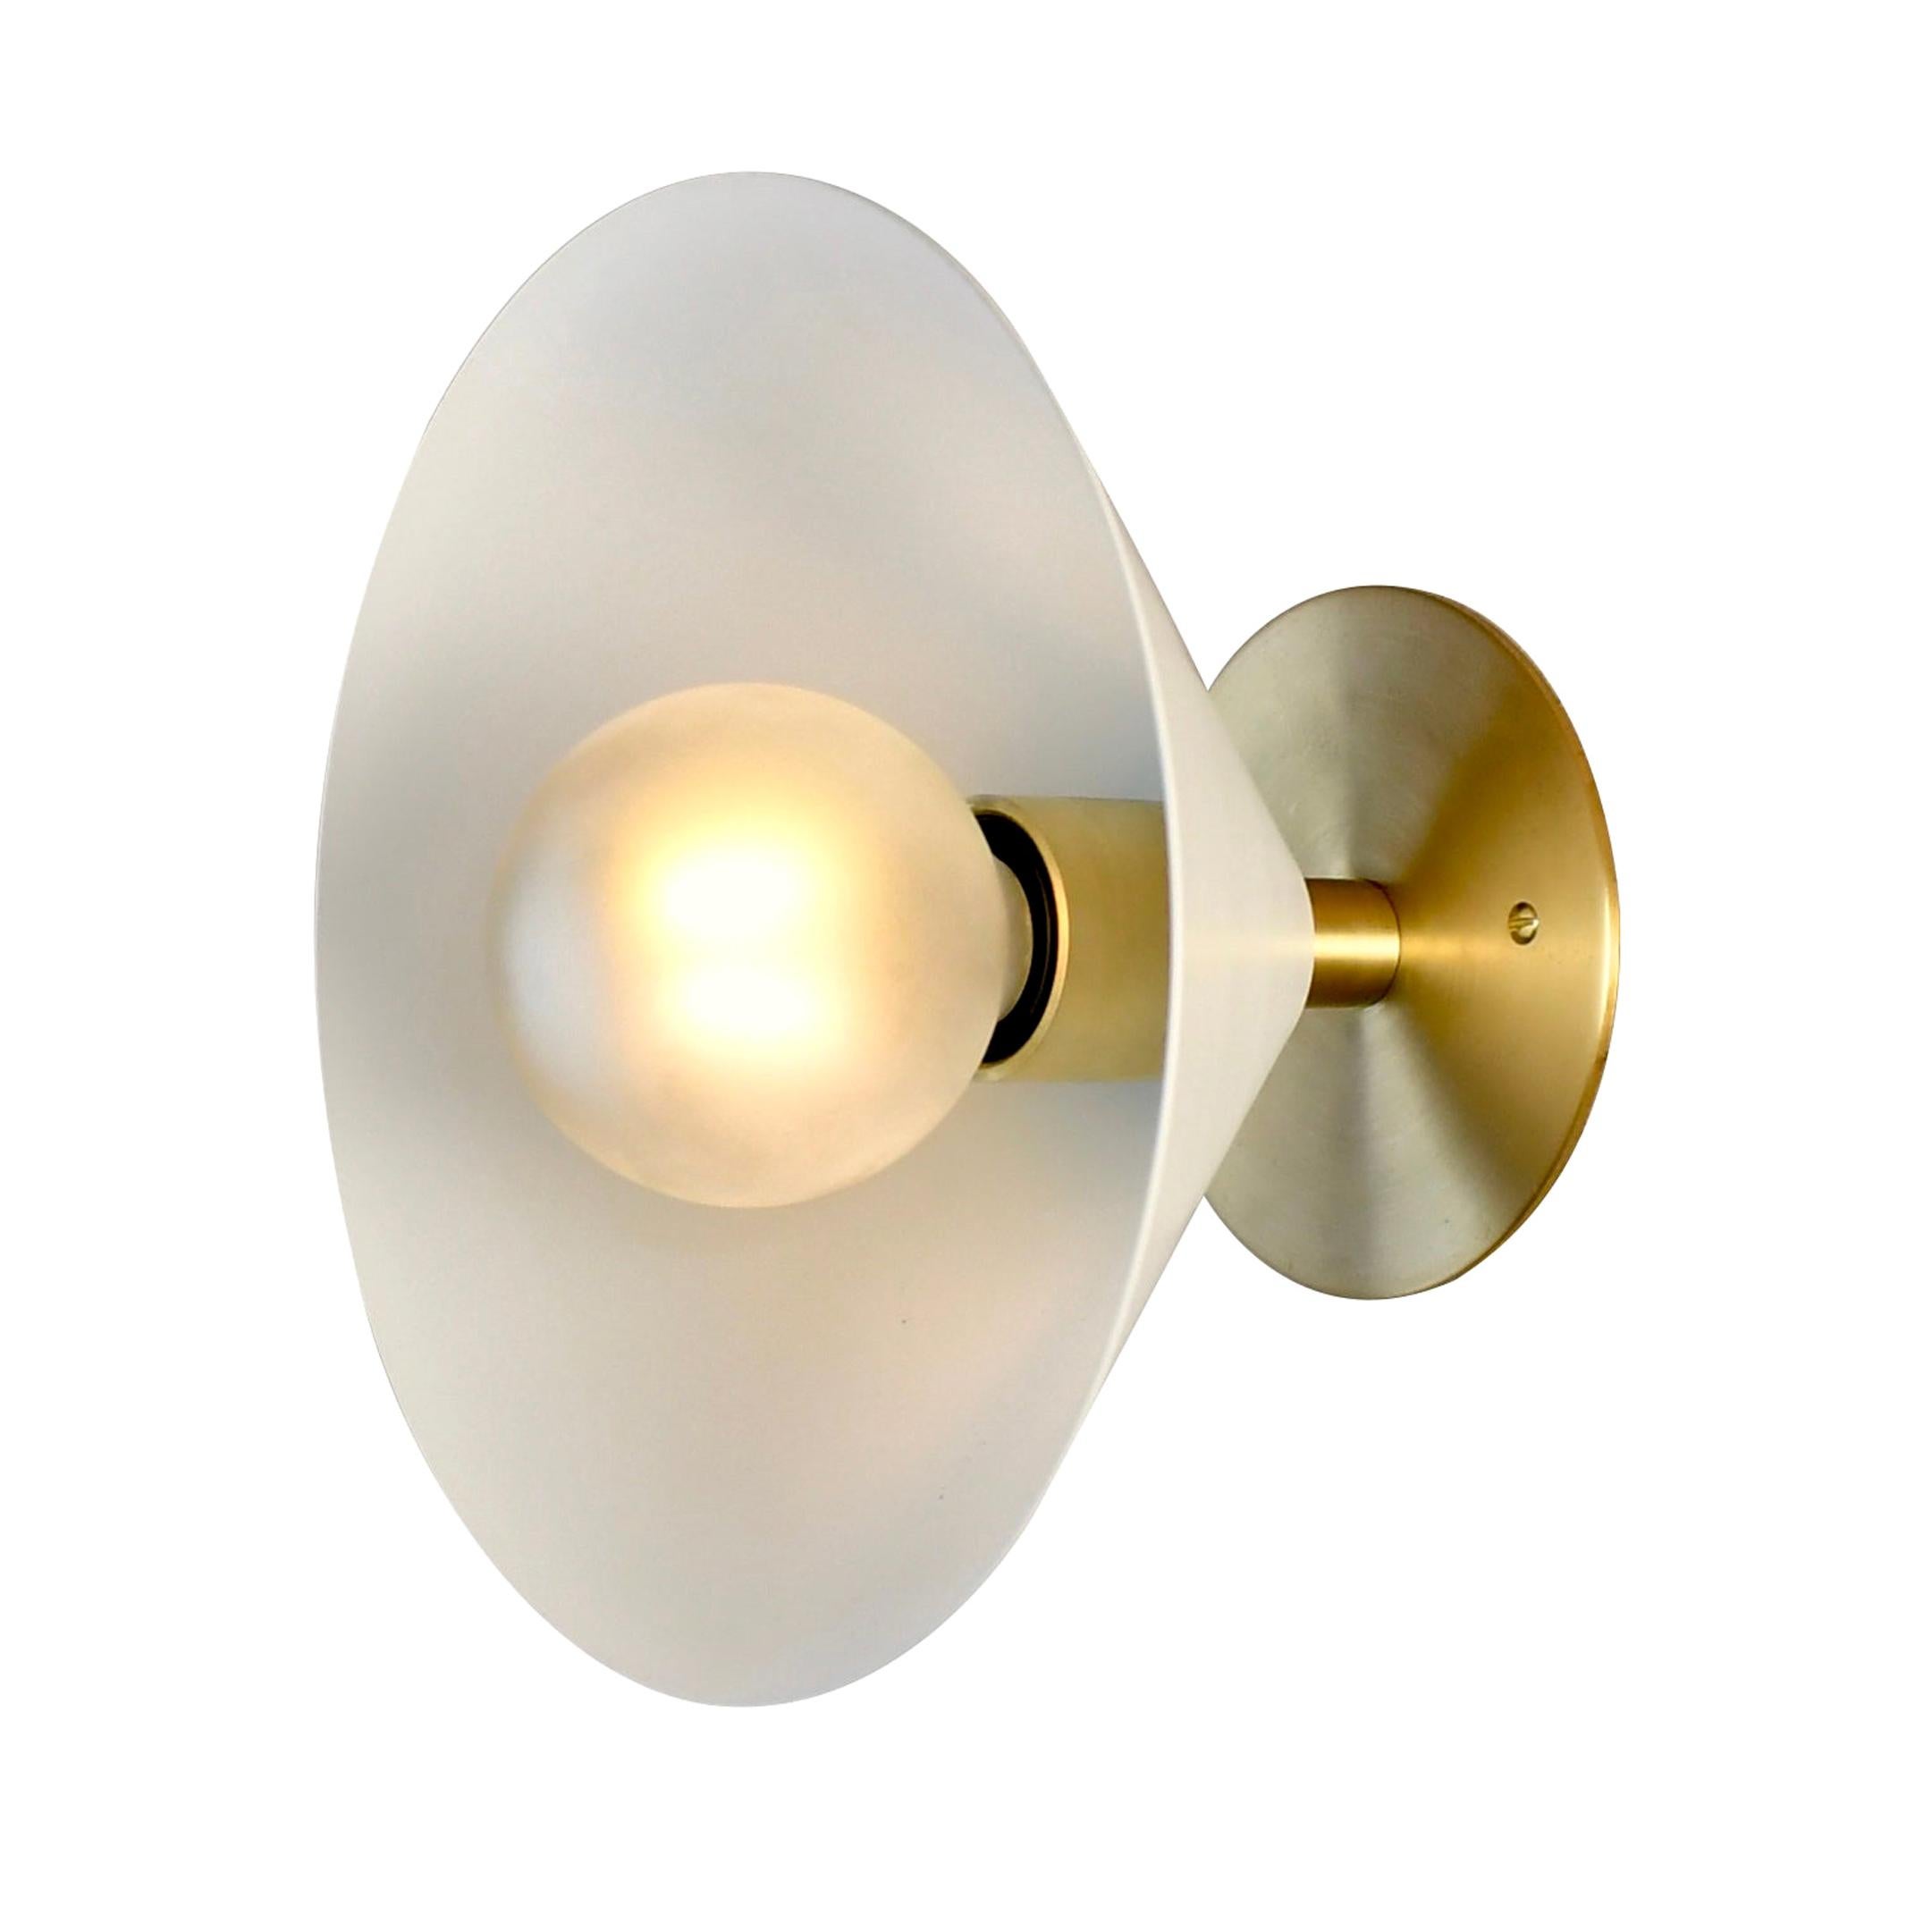 Focal Point Wall Sconce in Brass and White Enamel by Blueprint Lighting, 2019